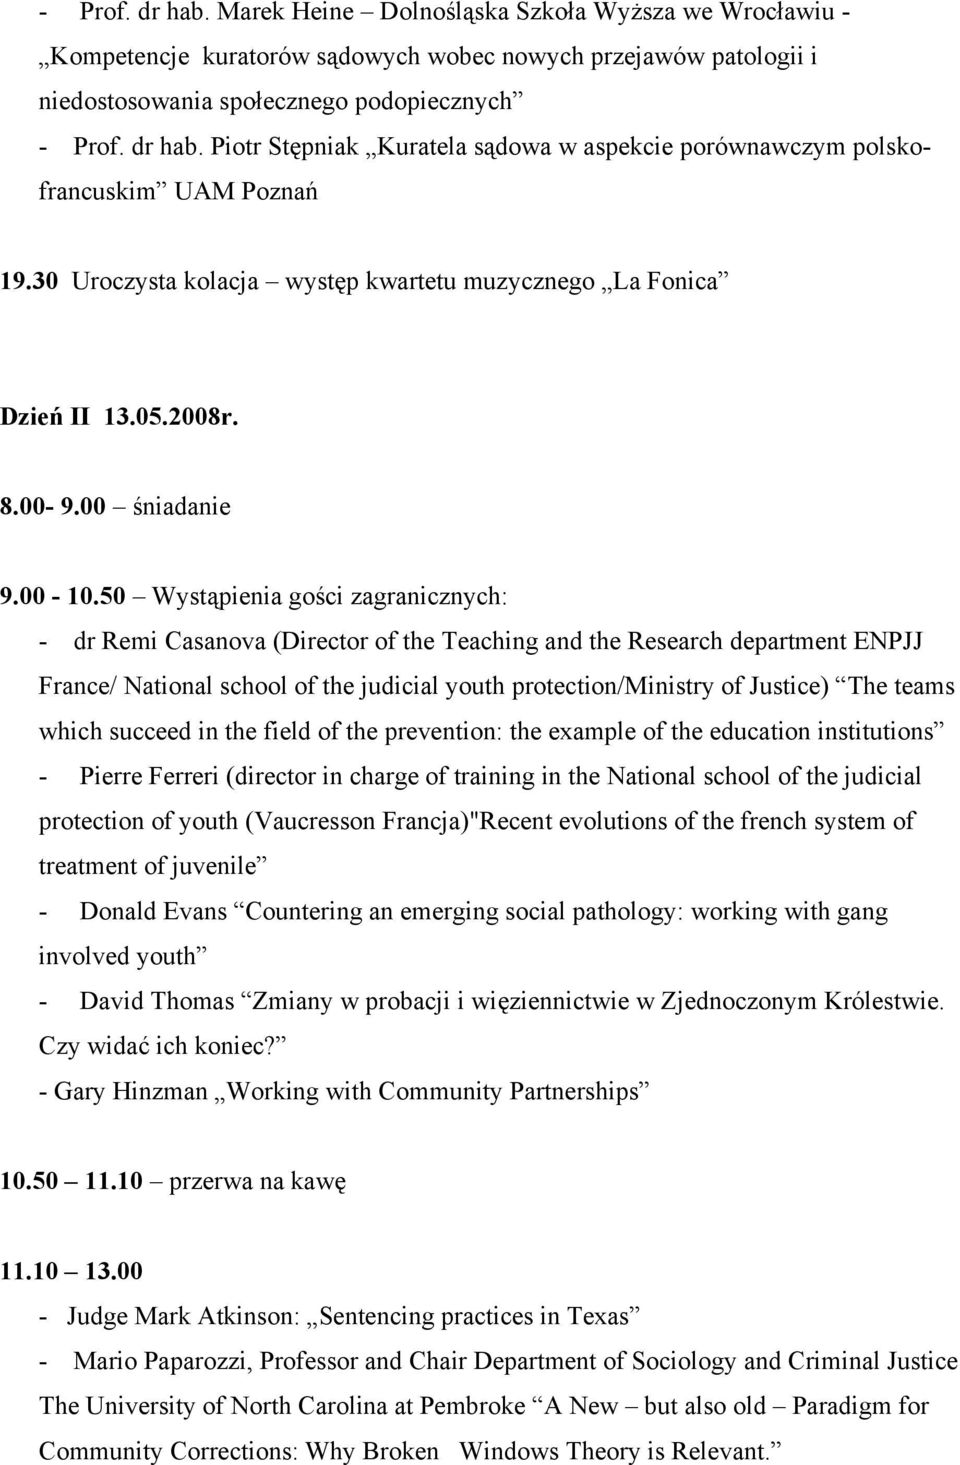 50 Wystąpienia gości zagranicznych: - dr Remi Casanova (Director of the Teaching and the Research department ENPJJ France/ National school of the judicial youth protection/ministry of Justice) The